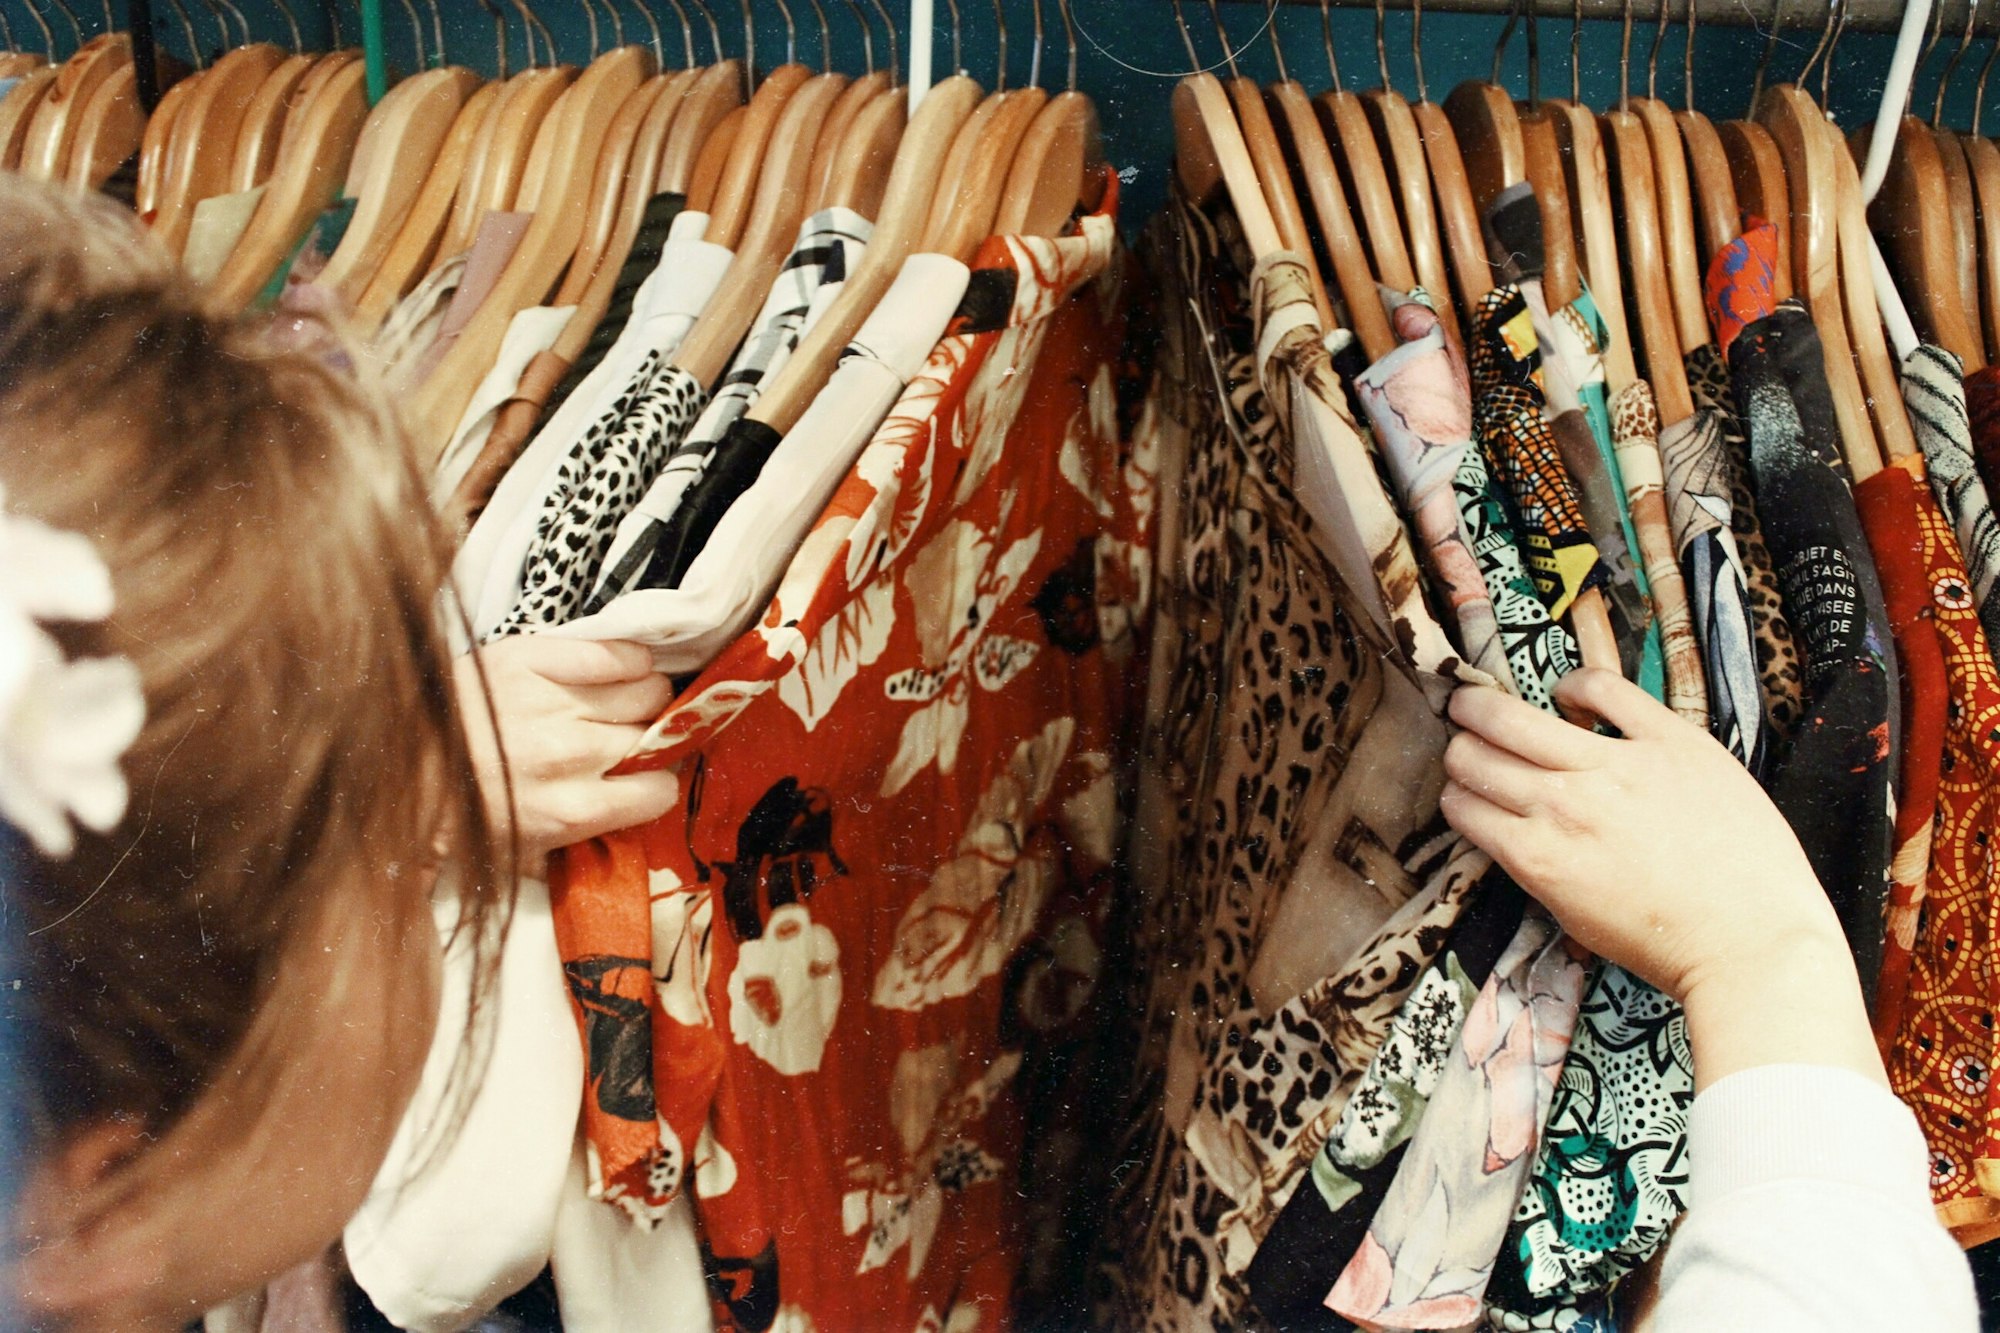  A woman shopping for clothes in a thrift store